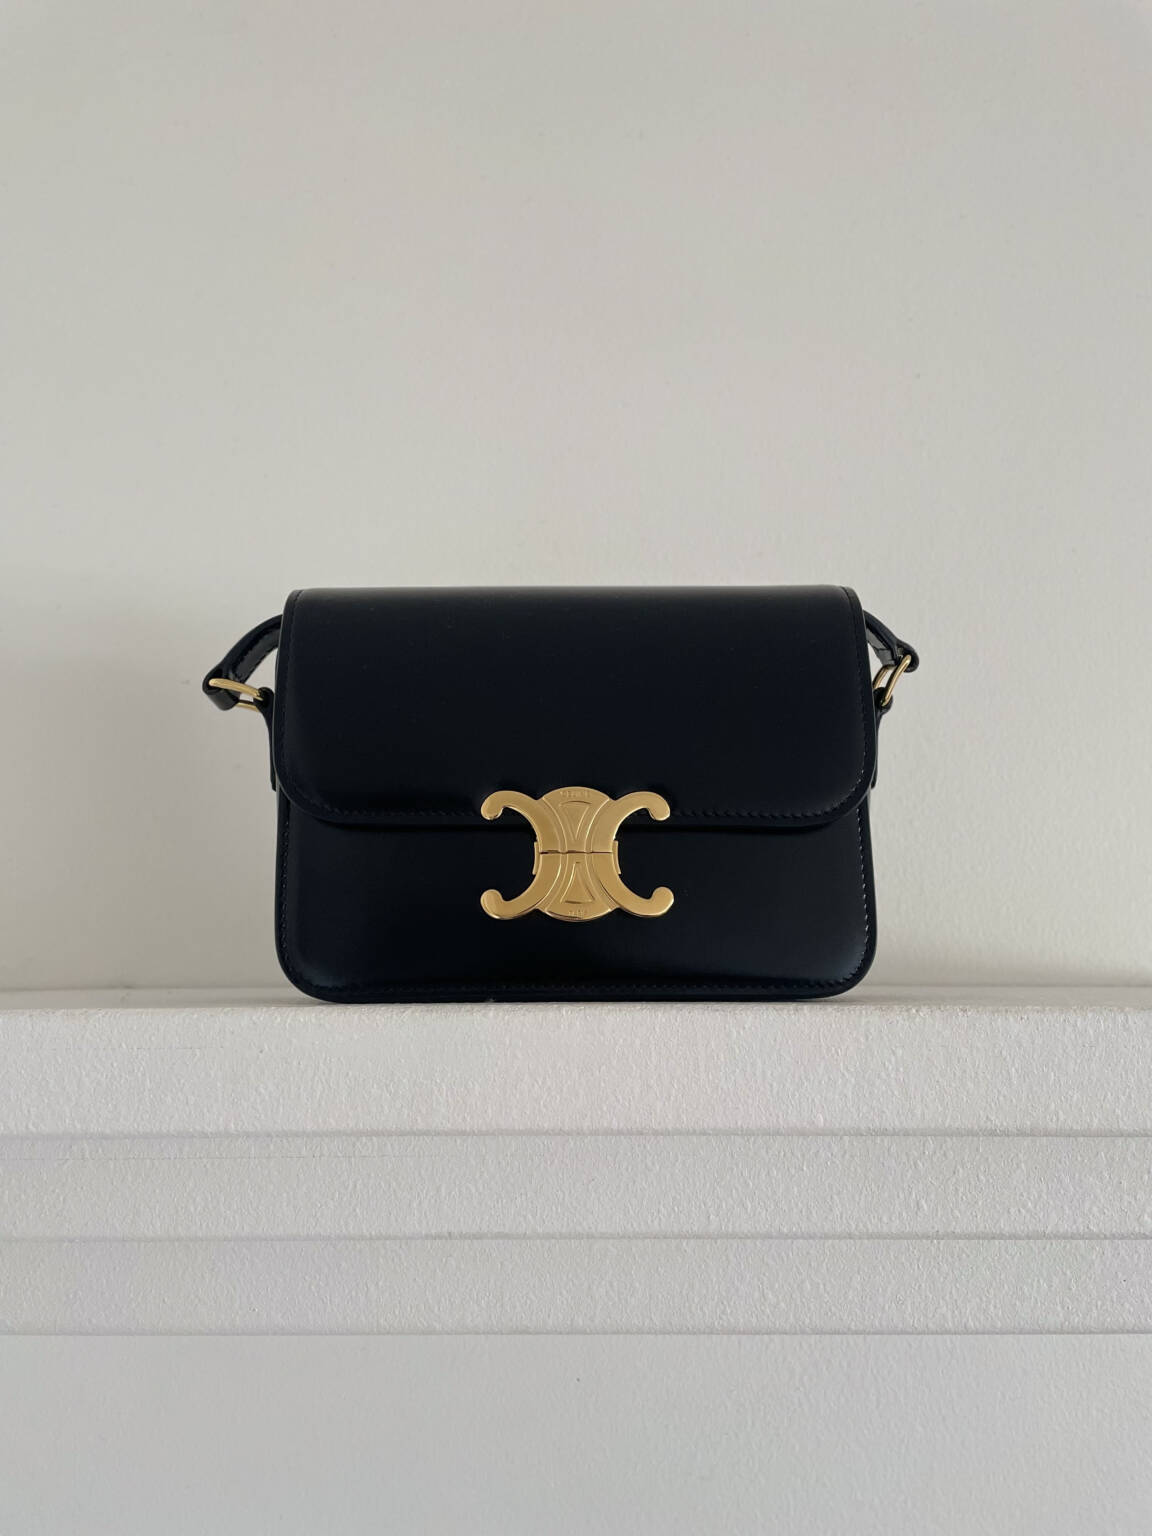 Falling Head Over Heels for ‘New’ Celine - Buying a Celine Triomphe in ...